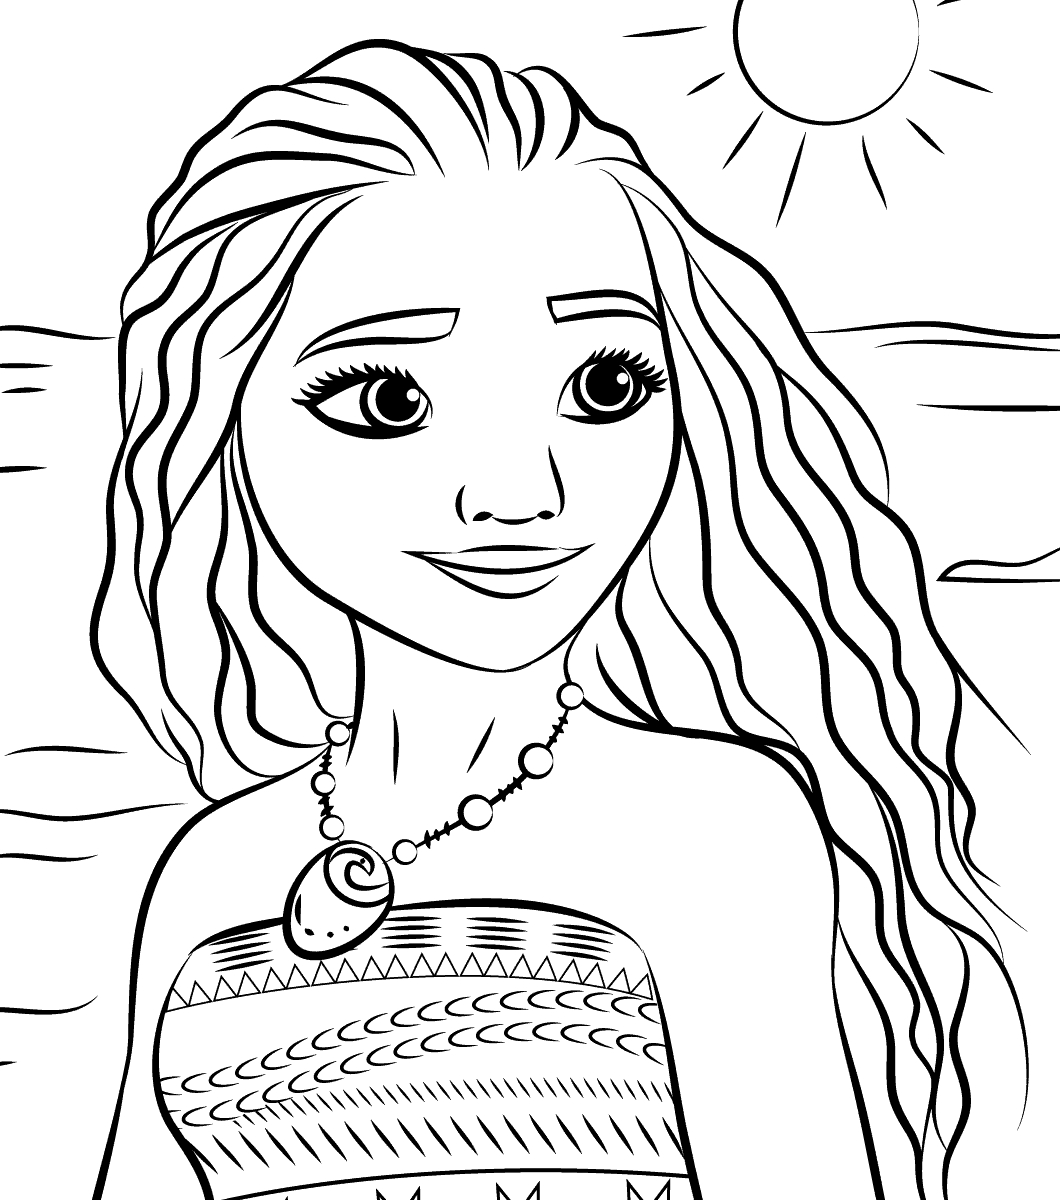 Coloring Page Moana – 20 fresh ideas for coloring – iconmaker.info